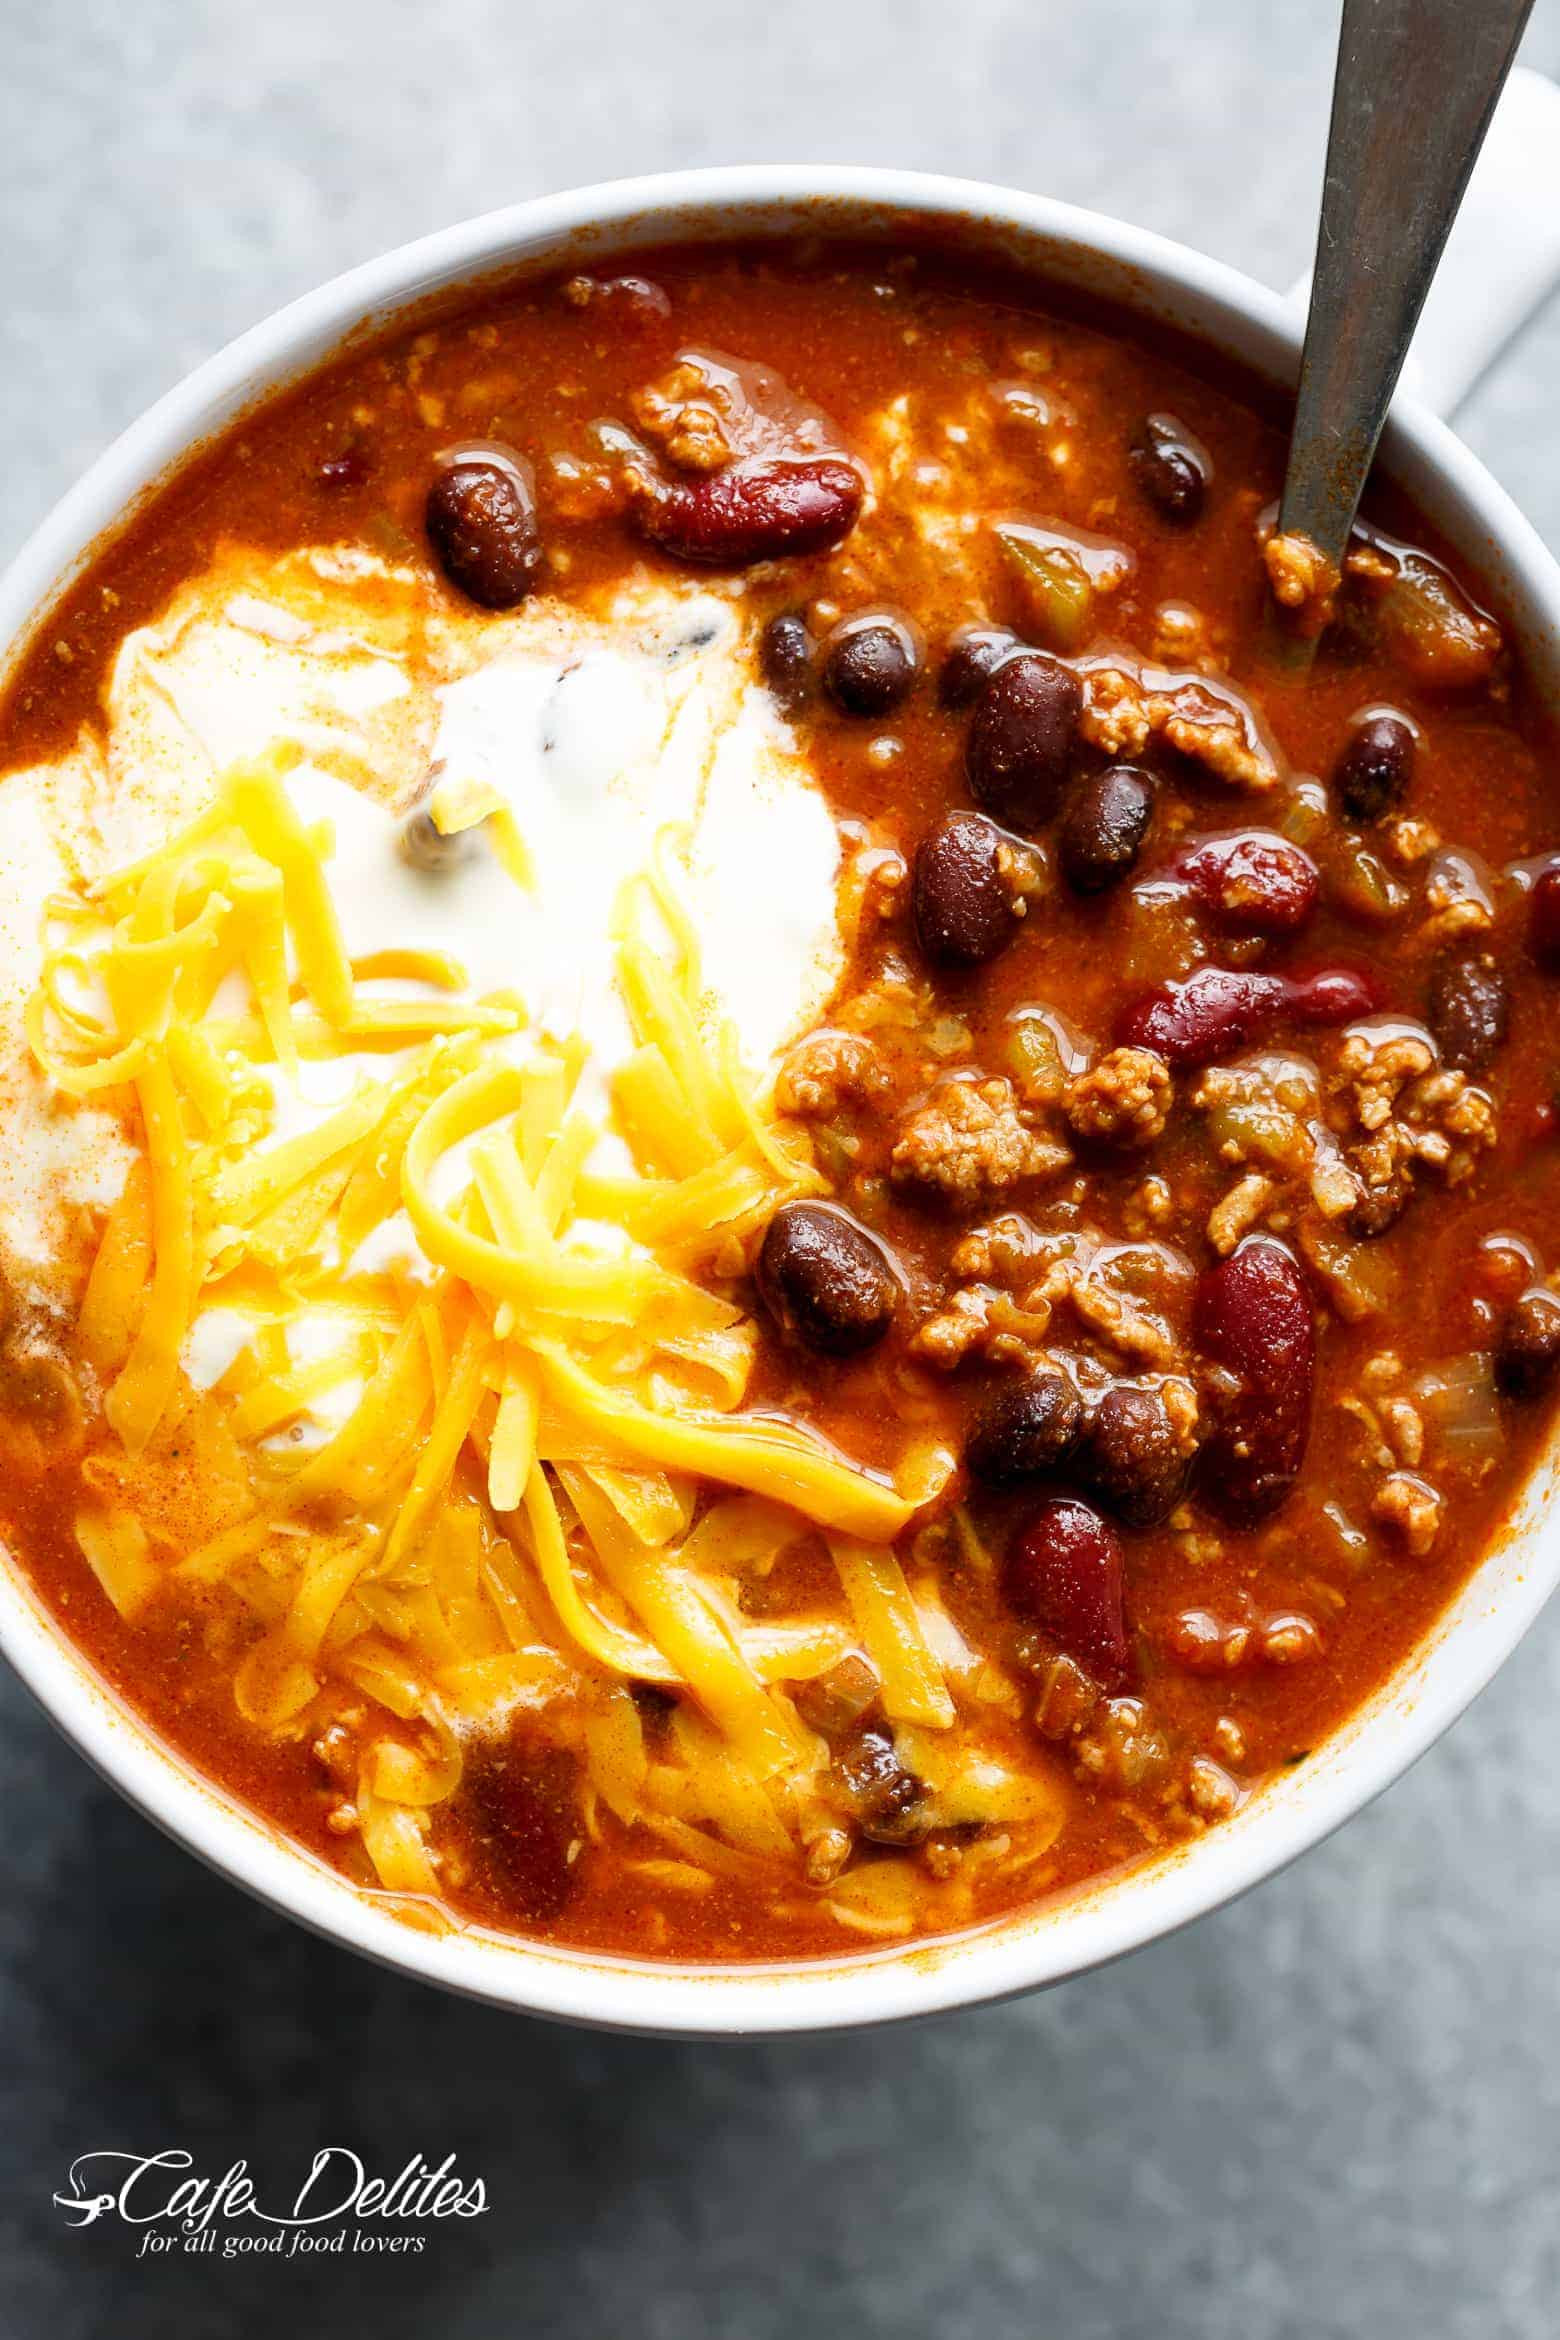 Chili Recipes With Beef
 Beef Chili Recipe Cafe Delites